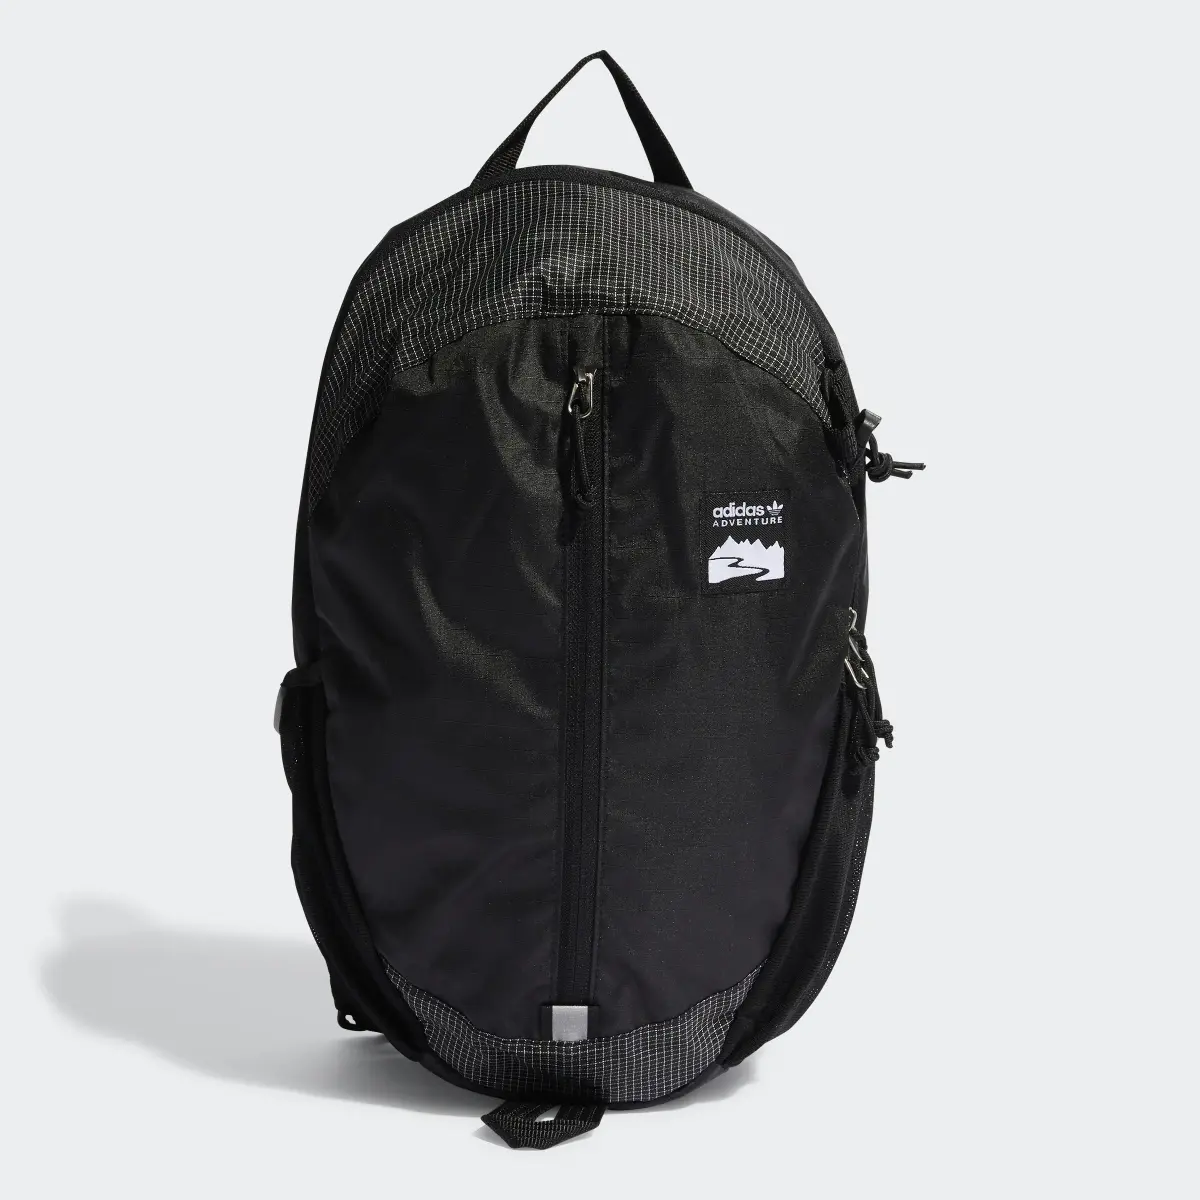 Adidas Adventure Backpack Small. 2